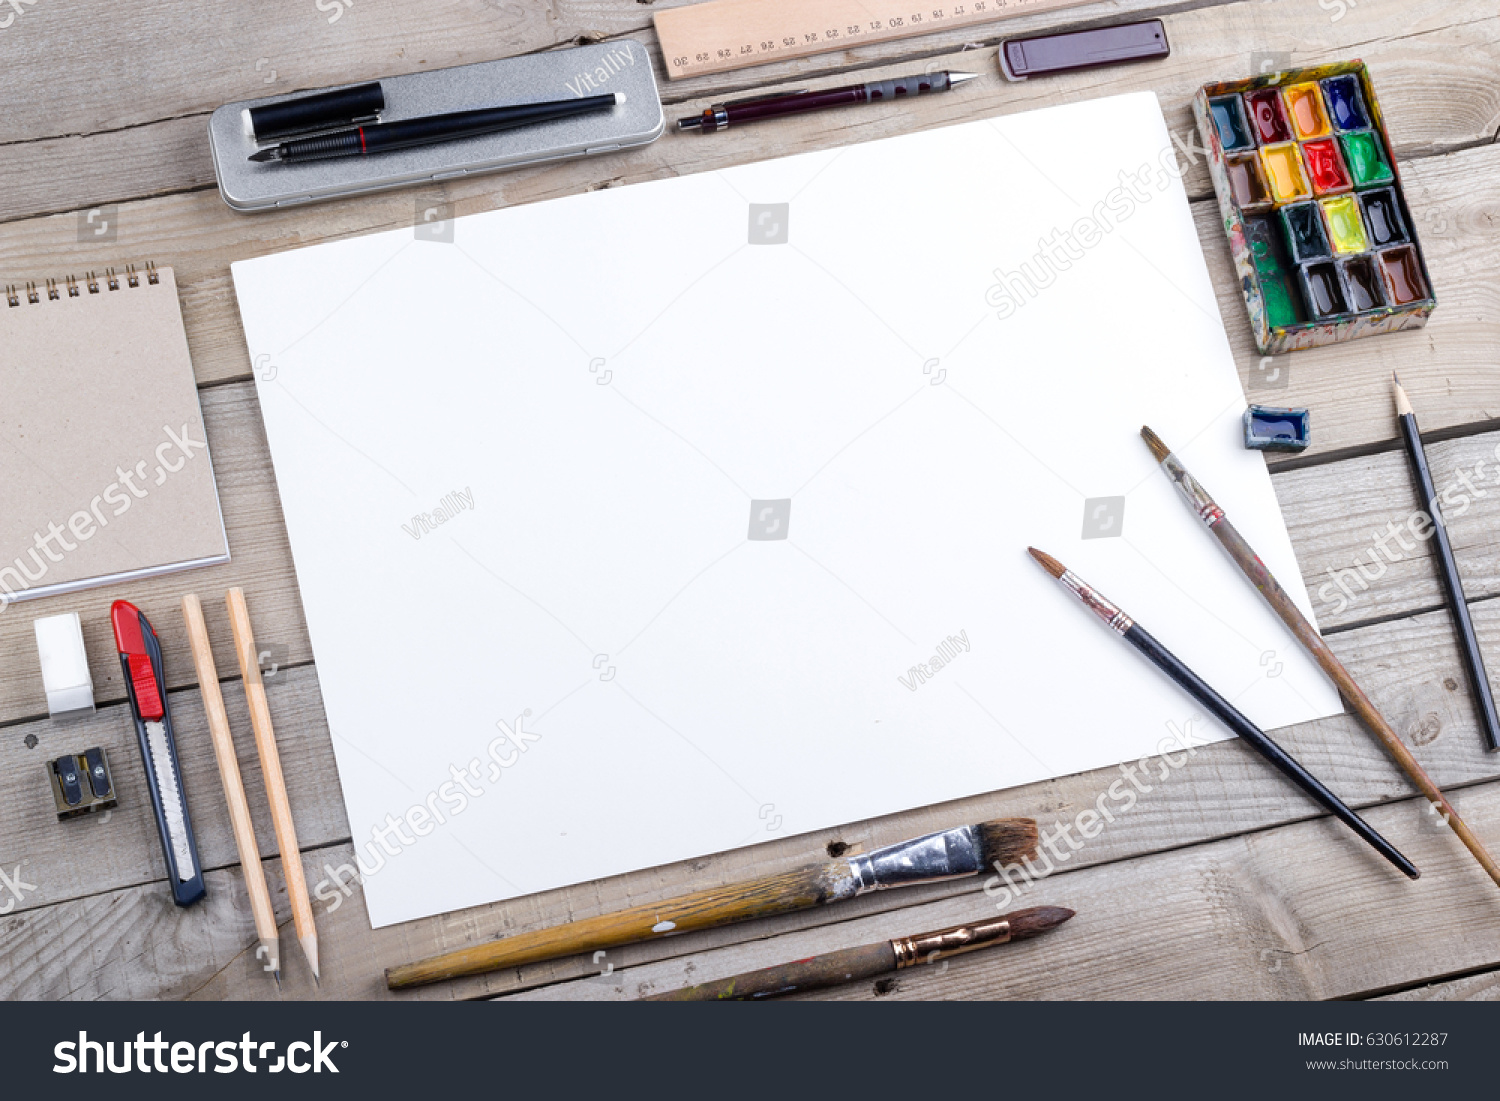 Photo. Mock-up for illustrators, artist, calligrapher, presentations and portfolios. Space for text, layout, artwork, illustrations, lettering, calligraphy working process #630612287